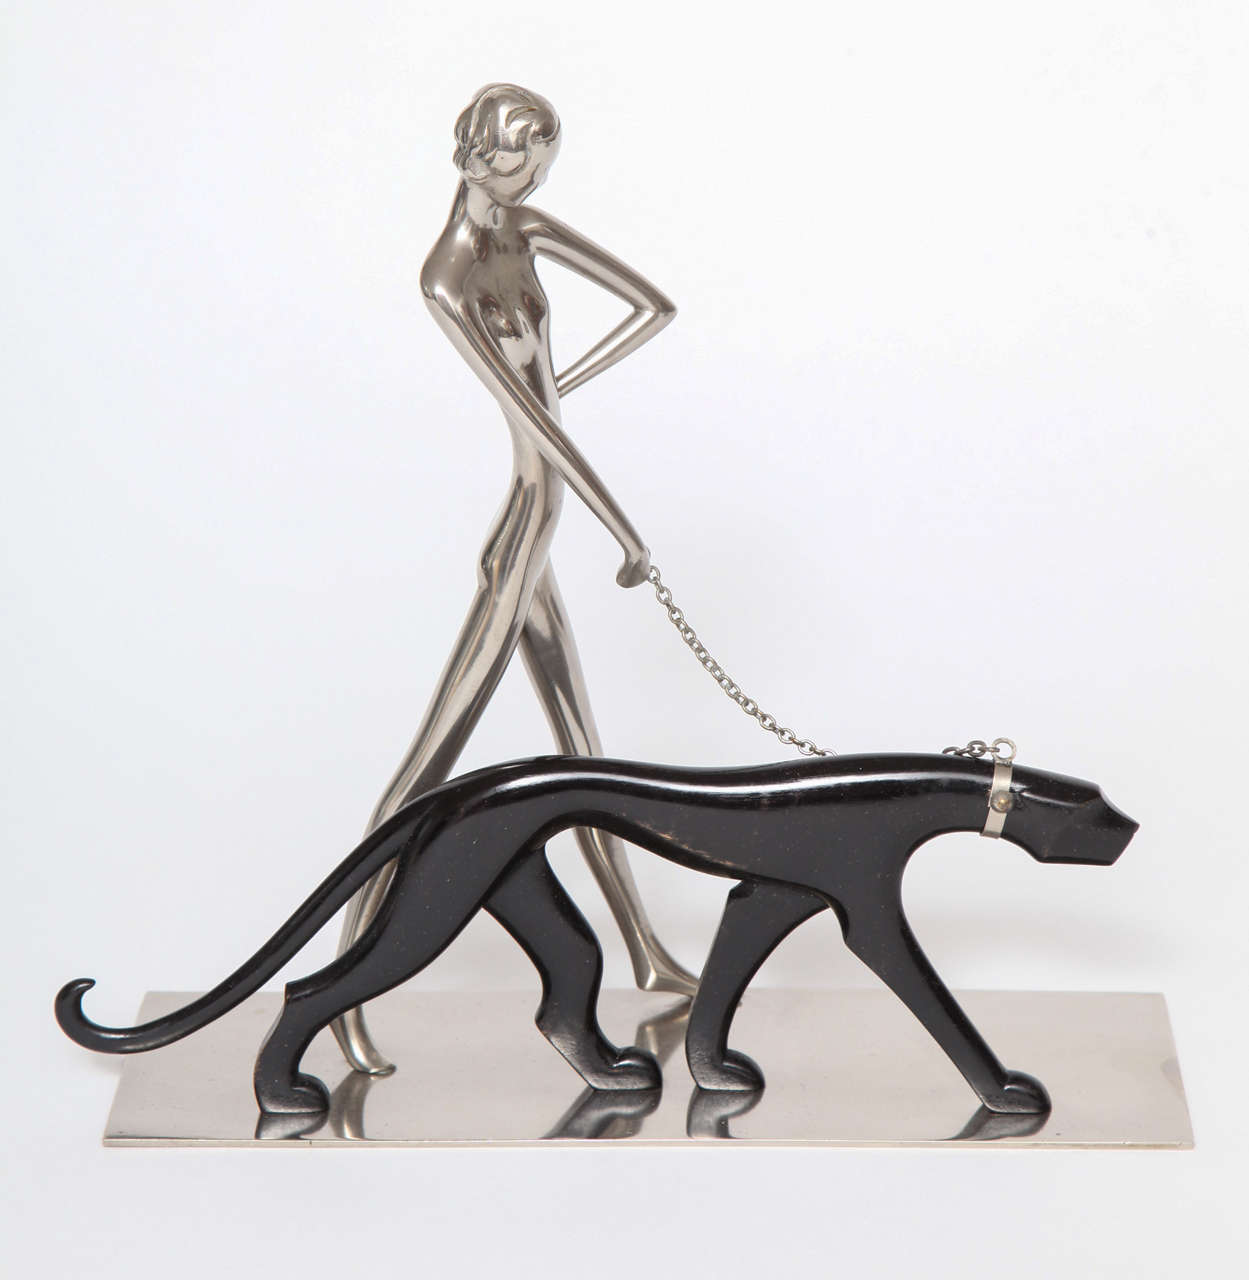 A Hagenauer sculpture of a nickel-plated brass nude woman walking a carved wood panther, 1928, Austria. Marked on underside of base.